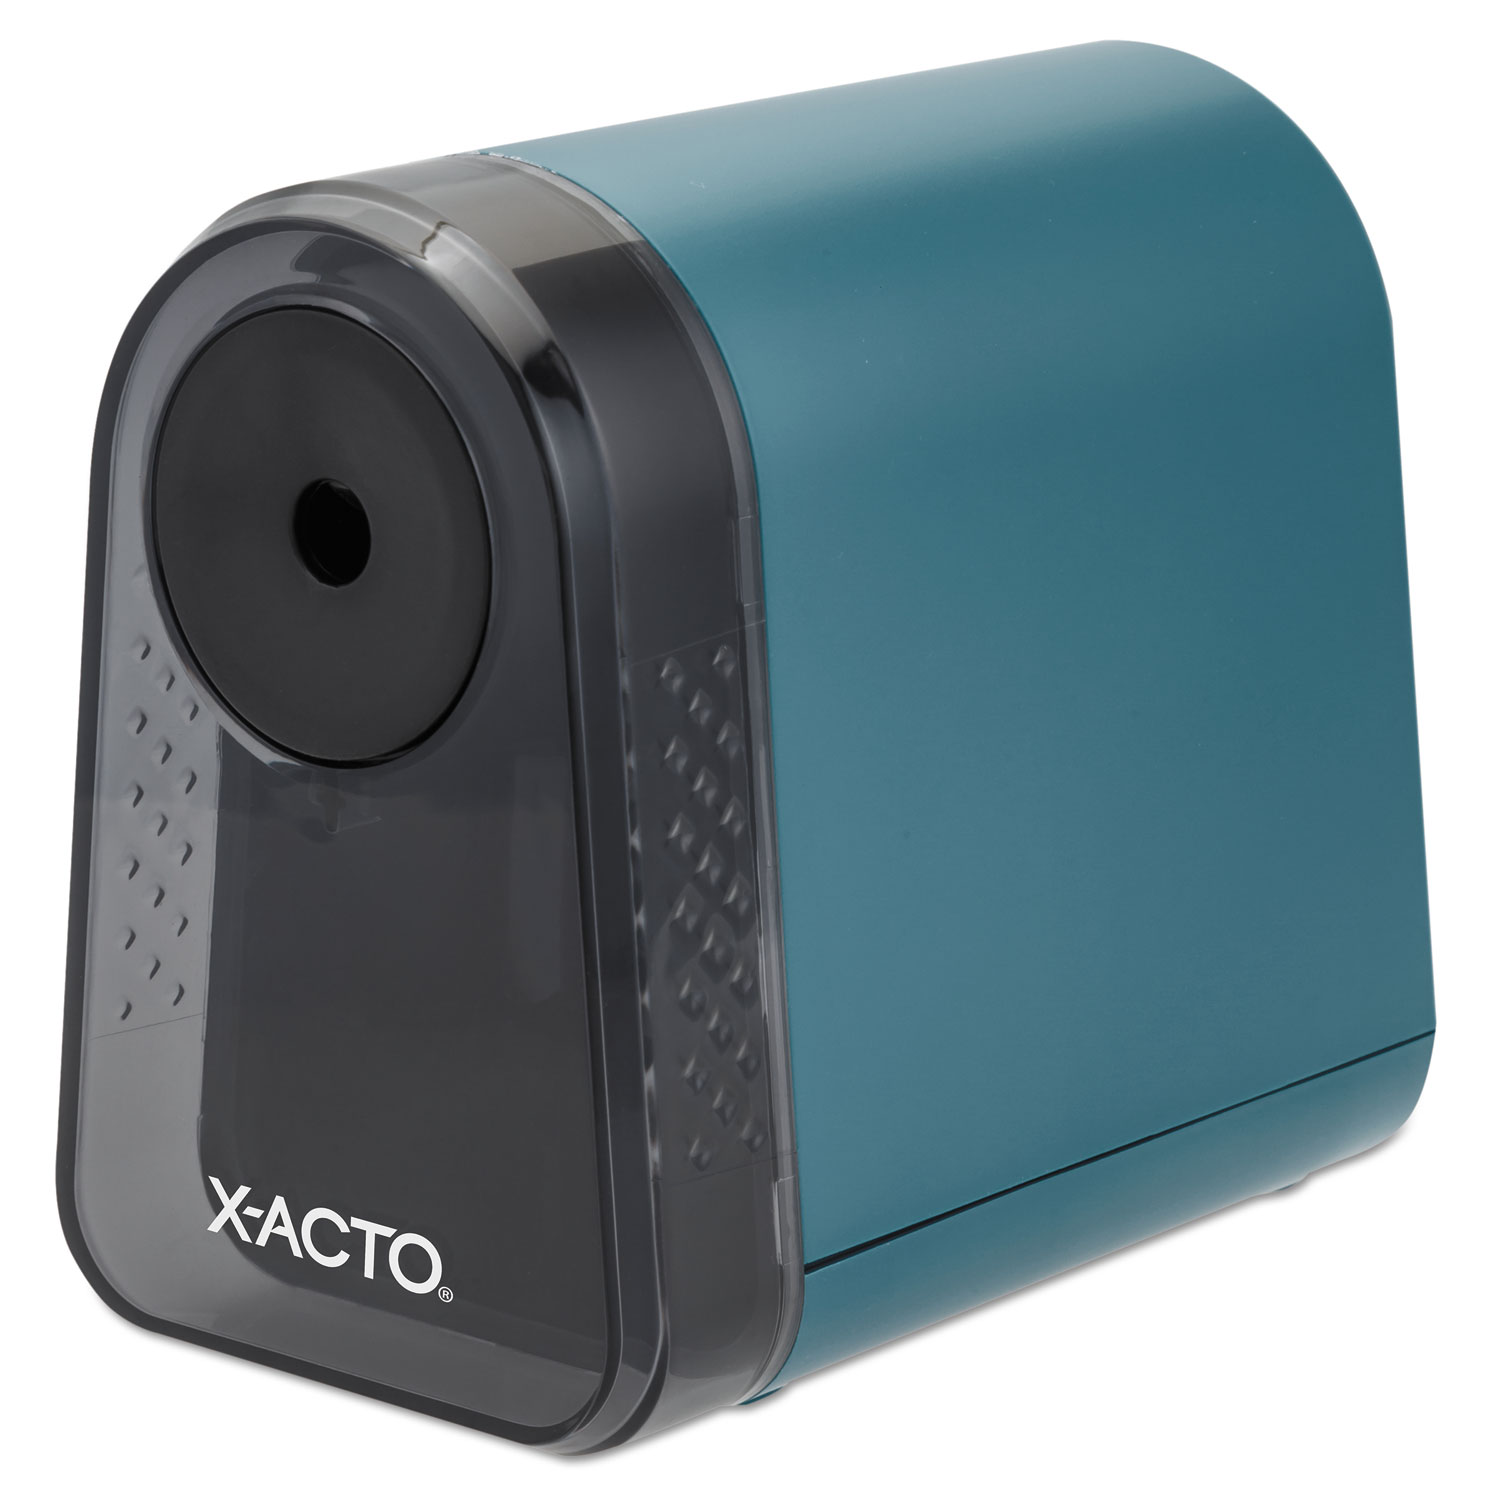  X-ACTO 19500 Mighty Mite Home Office Electric Pencil Sharpener, AC-Powered, 3.5 x 5 x 3.5, Mineral Green (EPI19500) 